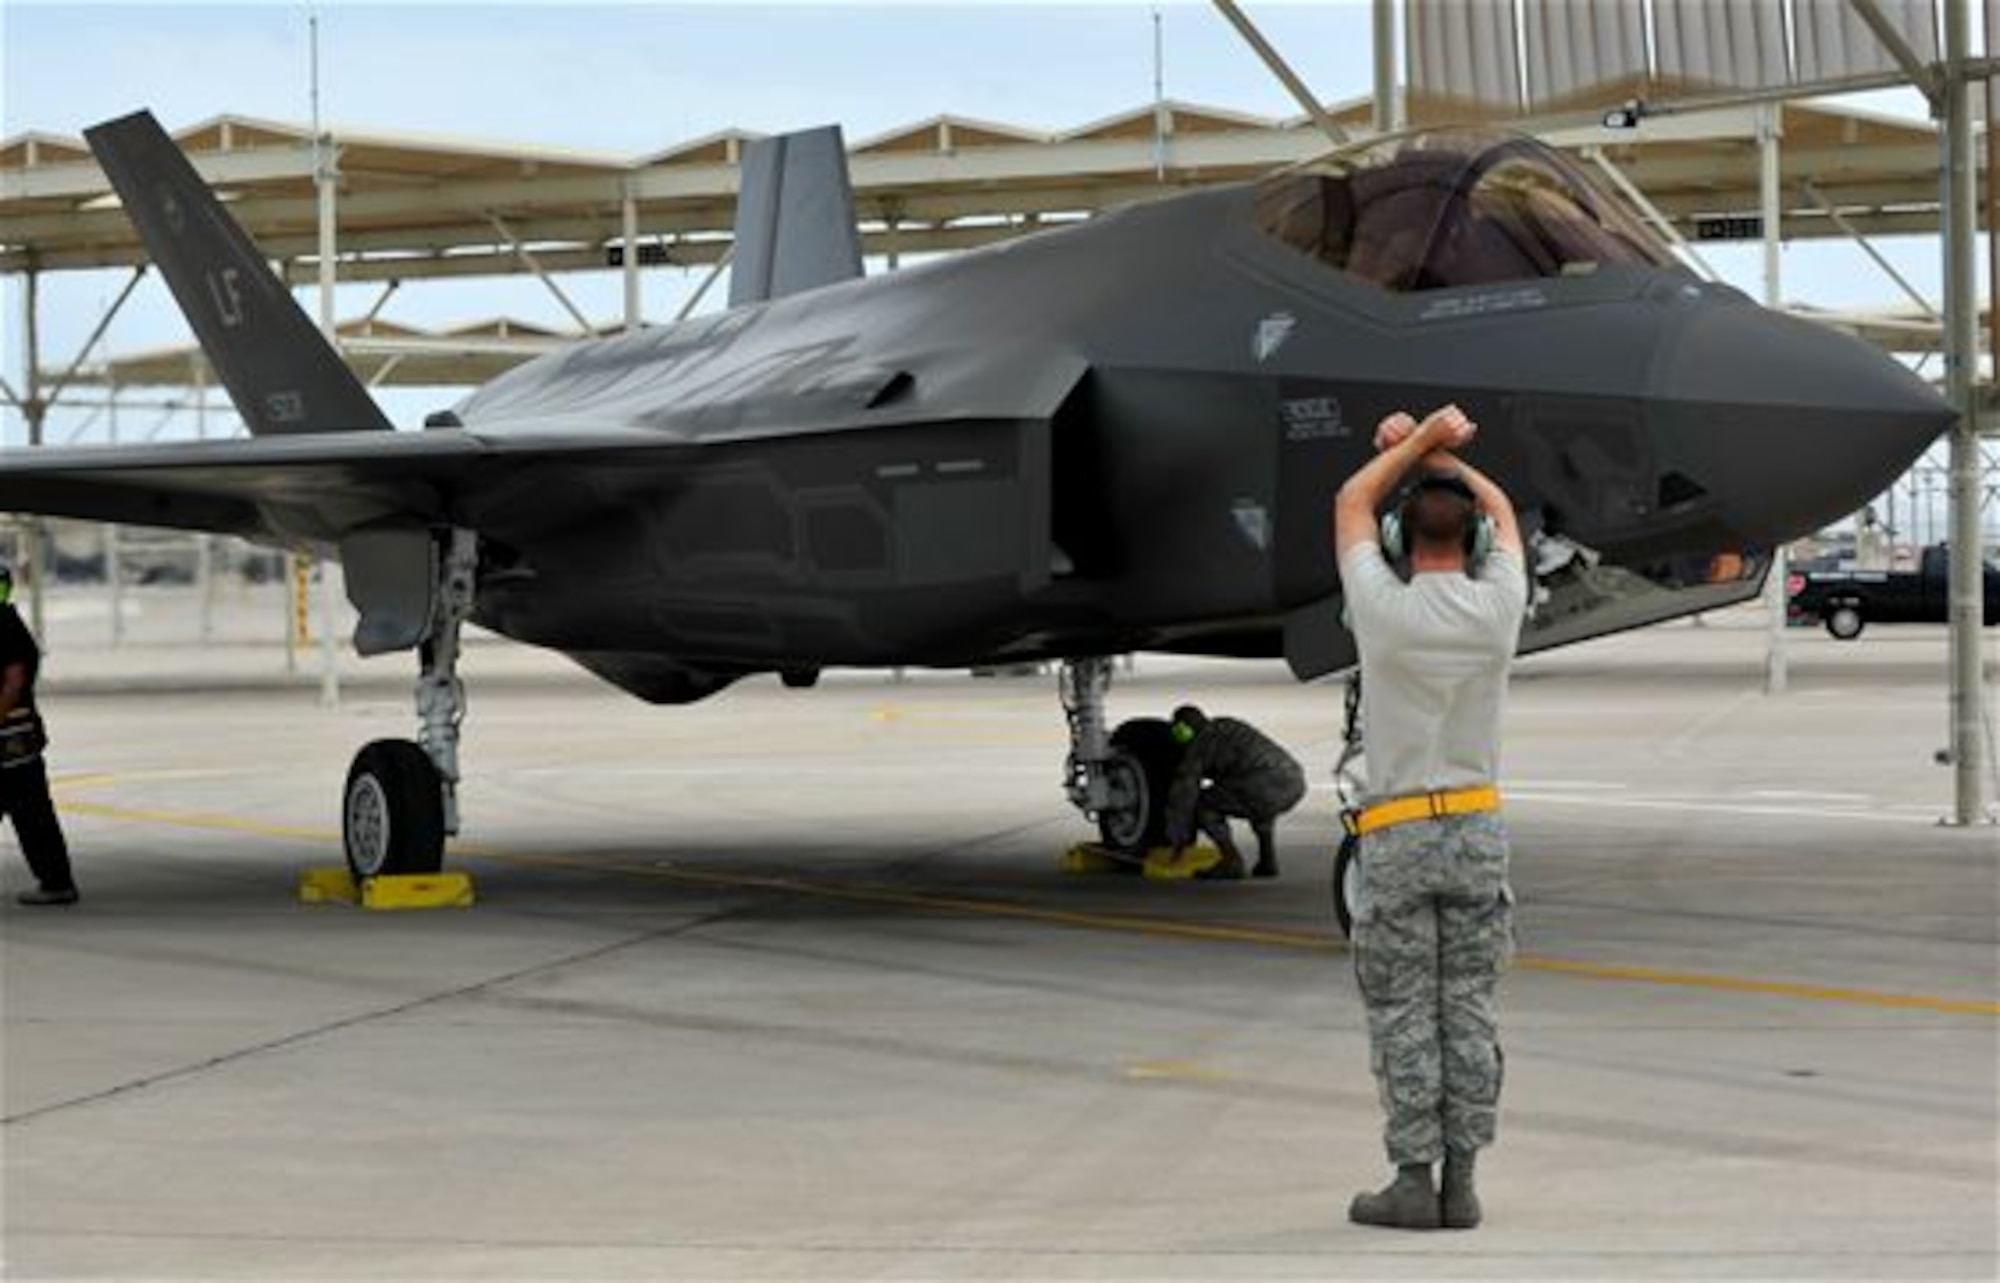 Senior Airman Paul Swanson marshals in a F-35 Lightning II after one of its first sorties May 6, 2014 at Luke Air Force Base, Ariz. Swanson is a 61st Aircraft Maintenance Unit crew chief. (U.S. Air Force photo/Senior Airman Jason Colbert)